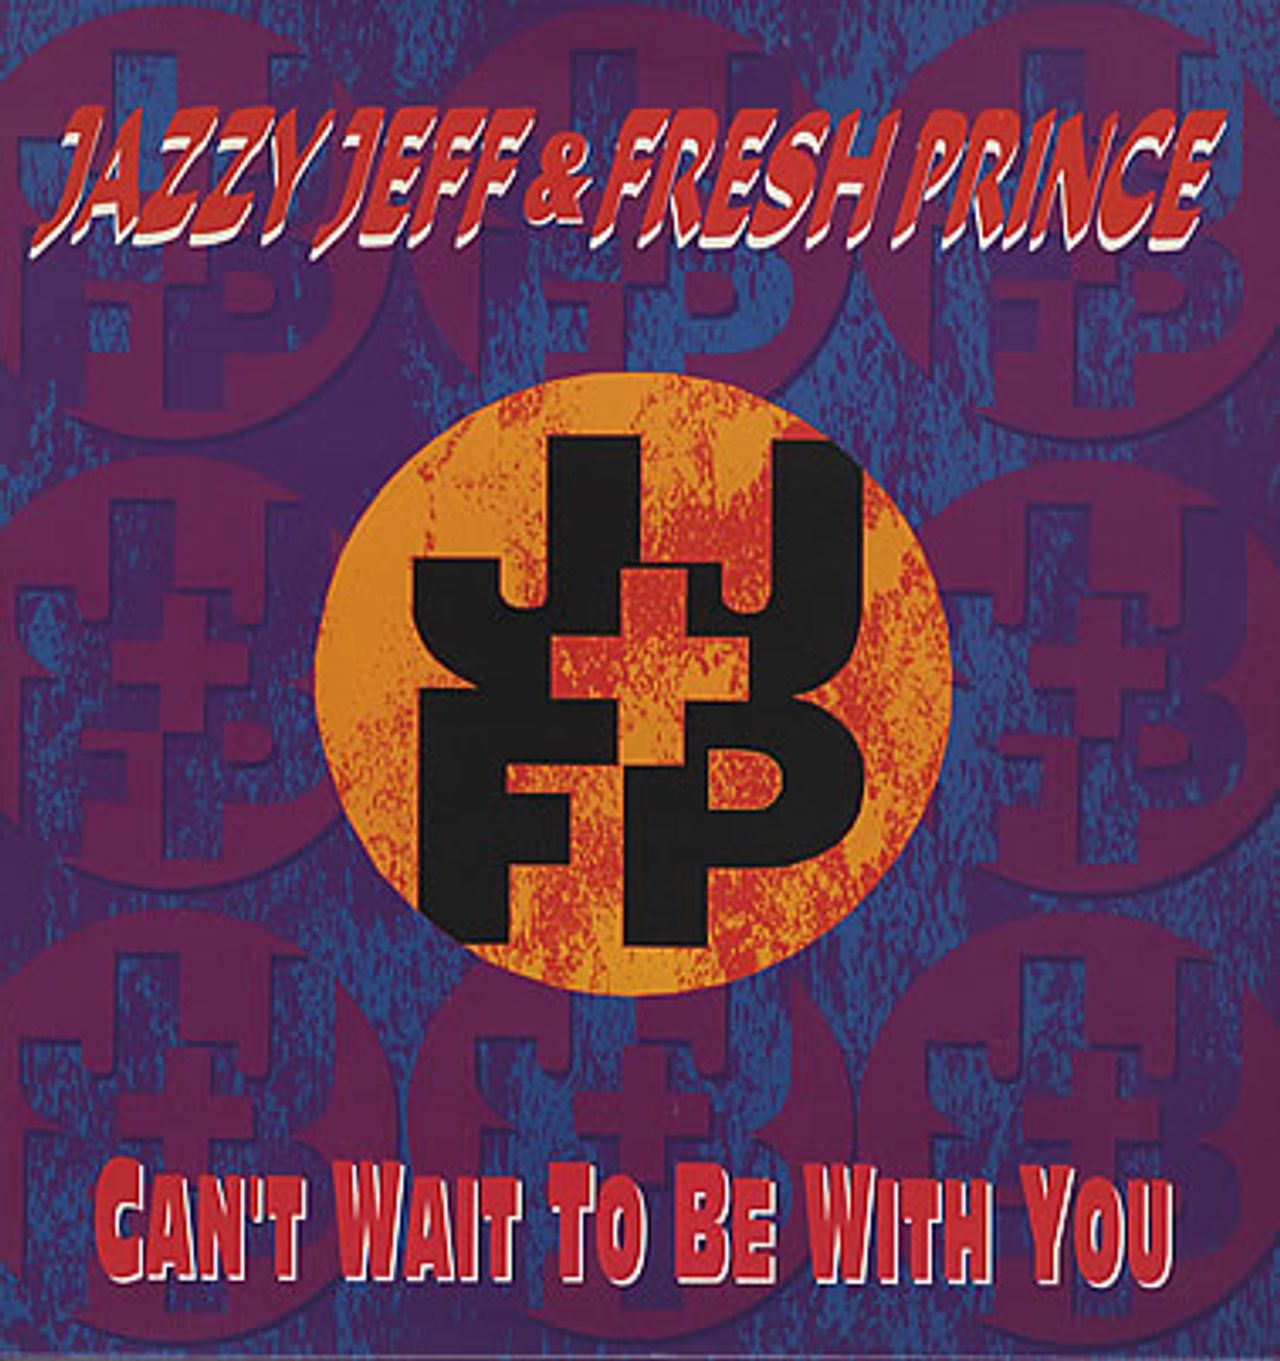 DJ Jazzy Jeff & The Fresh Prince Can't Wait To Be With You UK 12